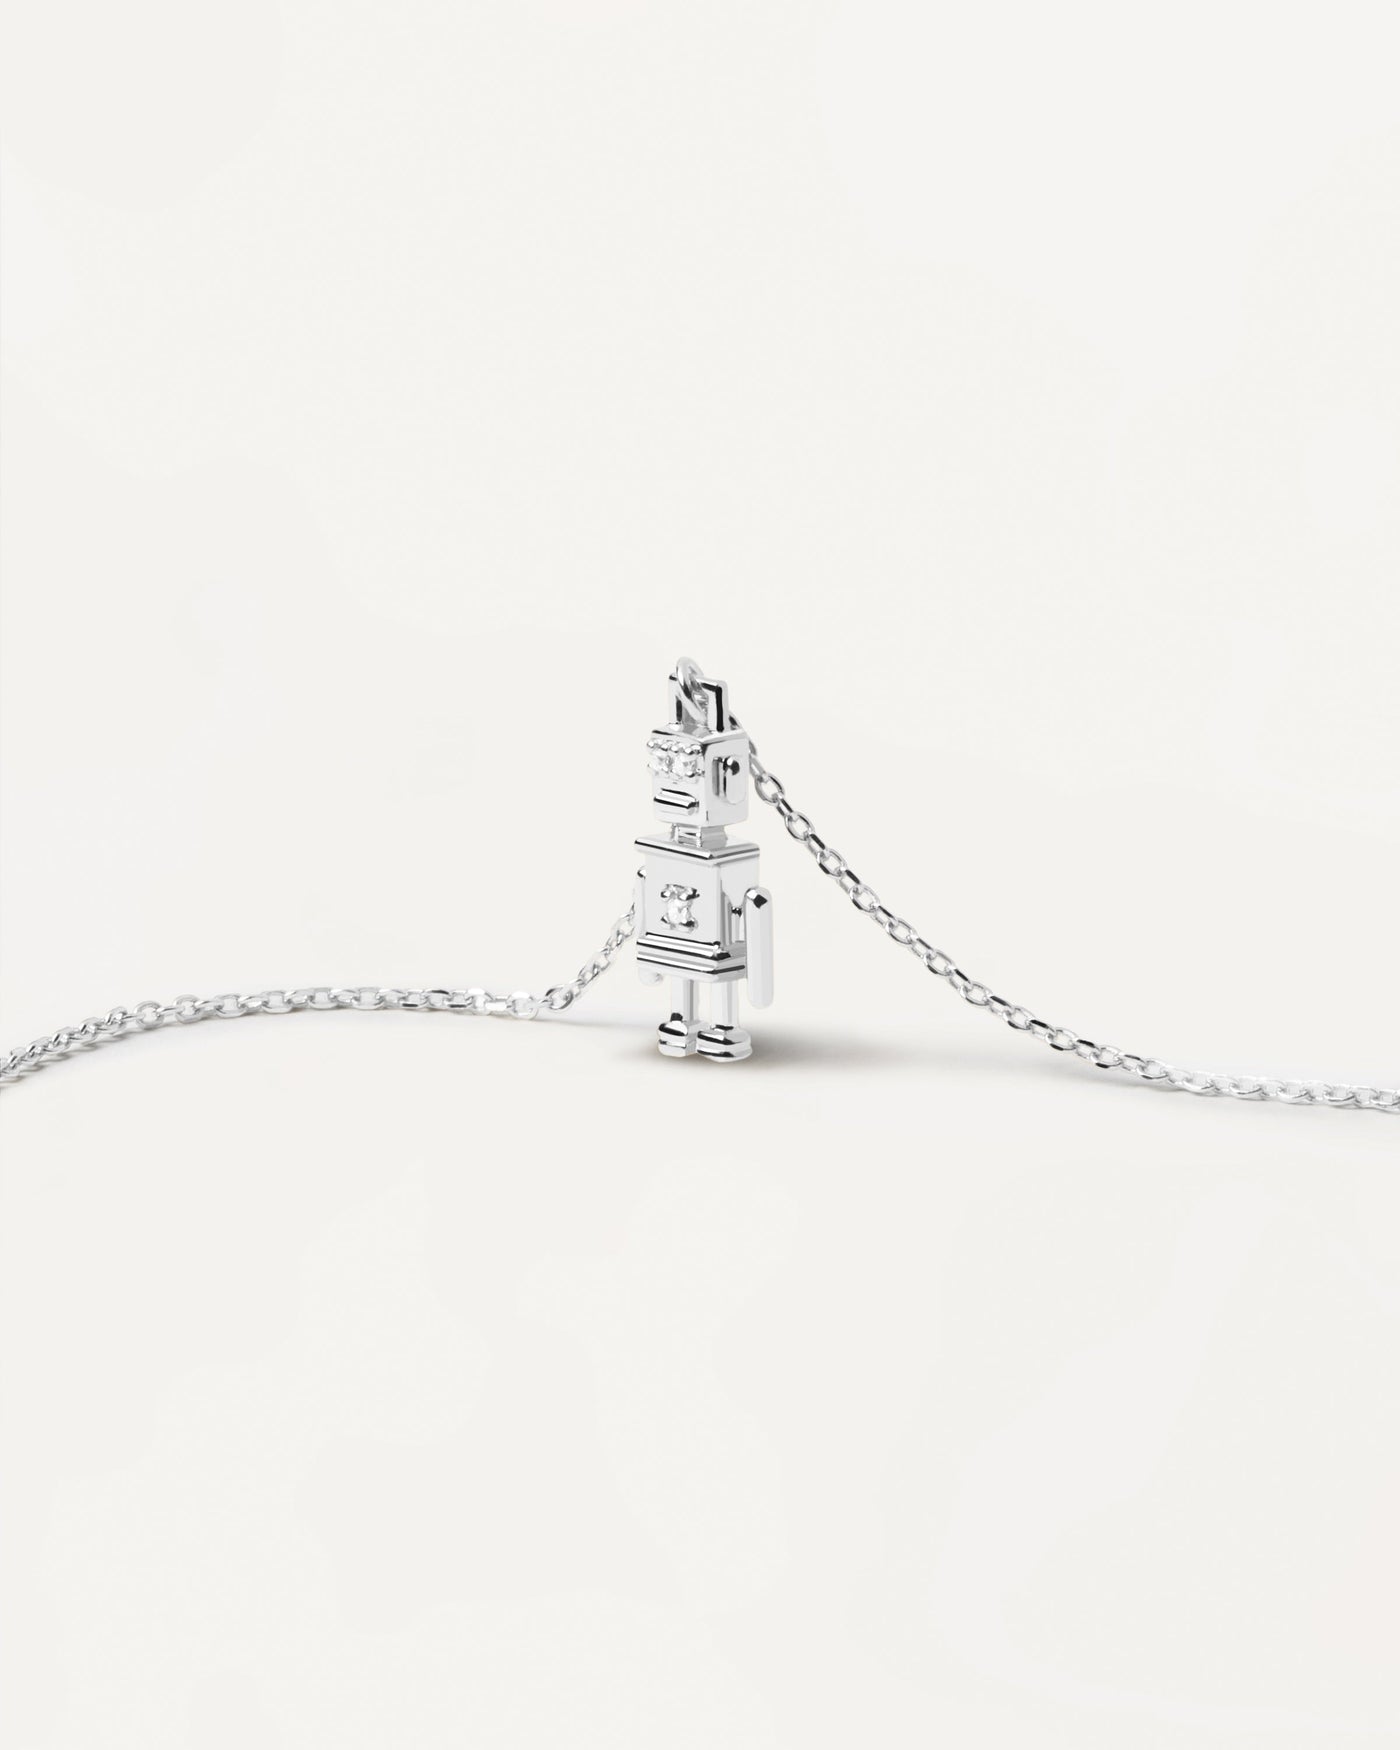 2023 Selection | Robert Silver Necklace. Sterling silver necklace with a robot pendant. Get the latest arrival from PDPAOLA. Place your order safely and get this Best Seller. Free Shipping.